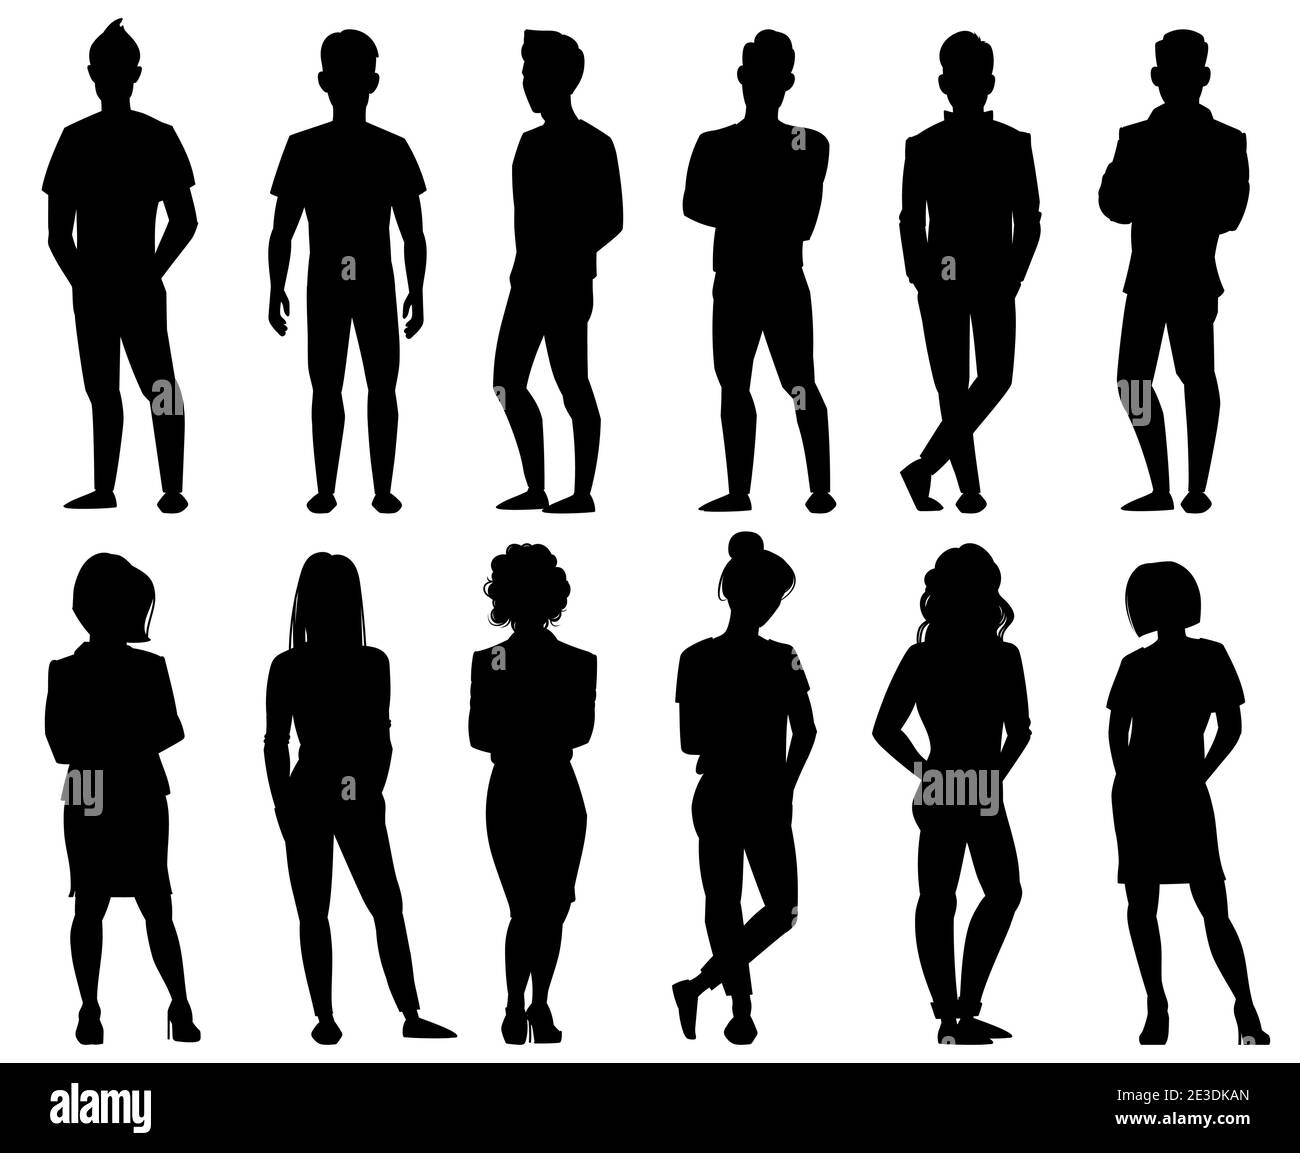 People silhouettes. Male and female anonymous person silhouettes. Adult people group outline symbols isolated vector illustration set Stock Vector